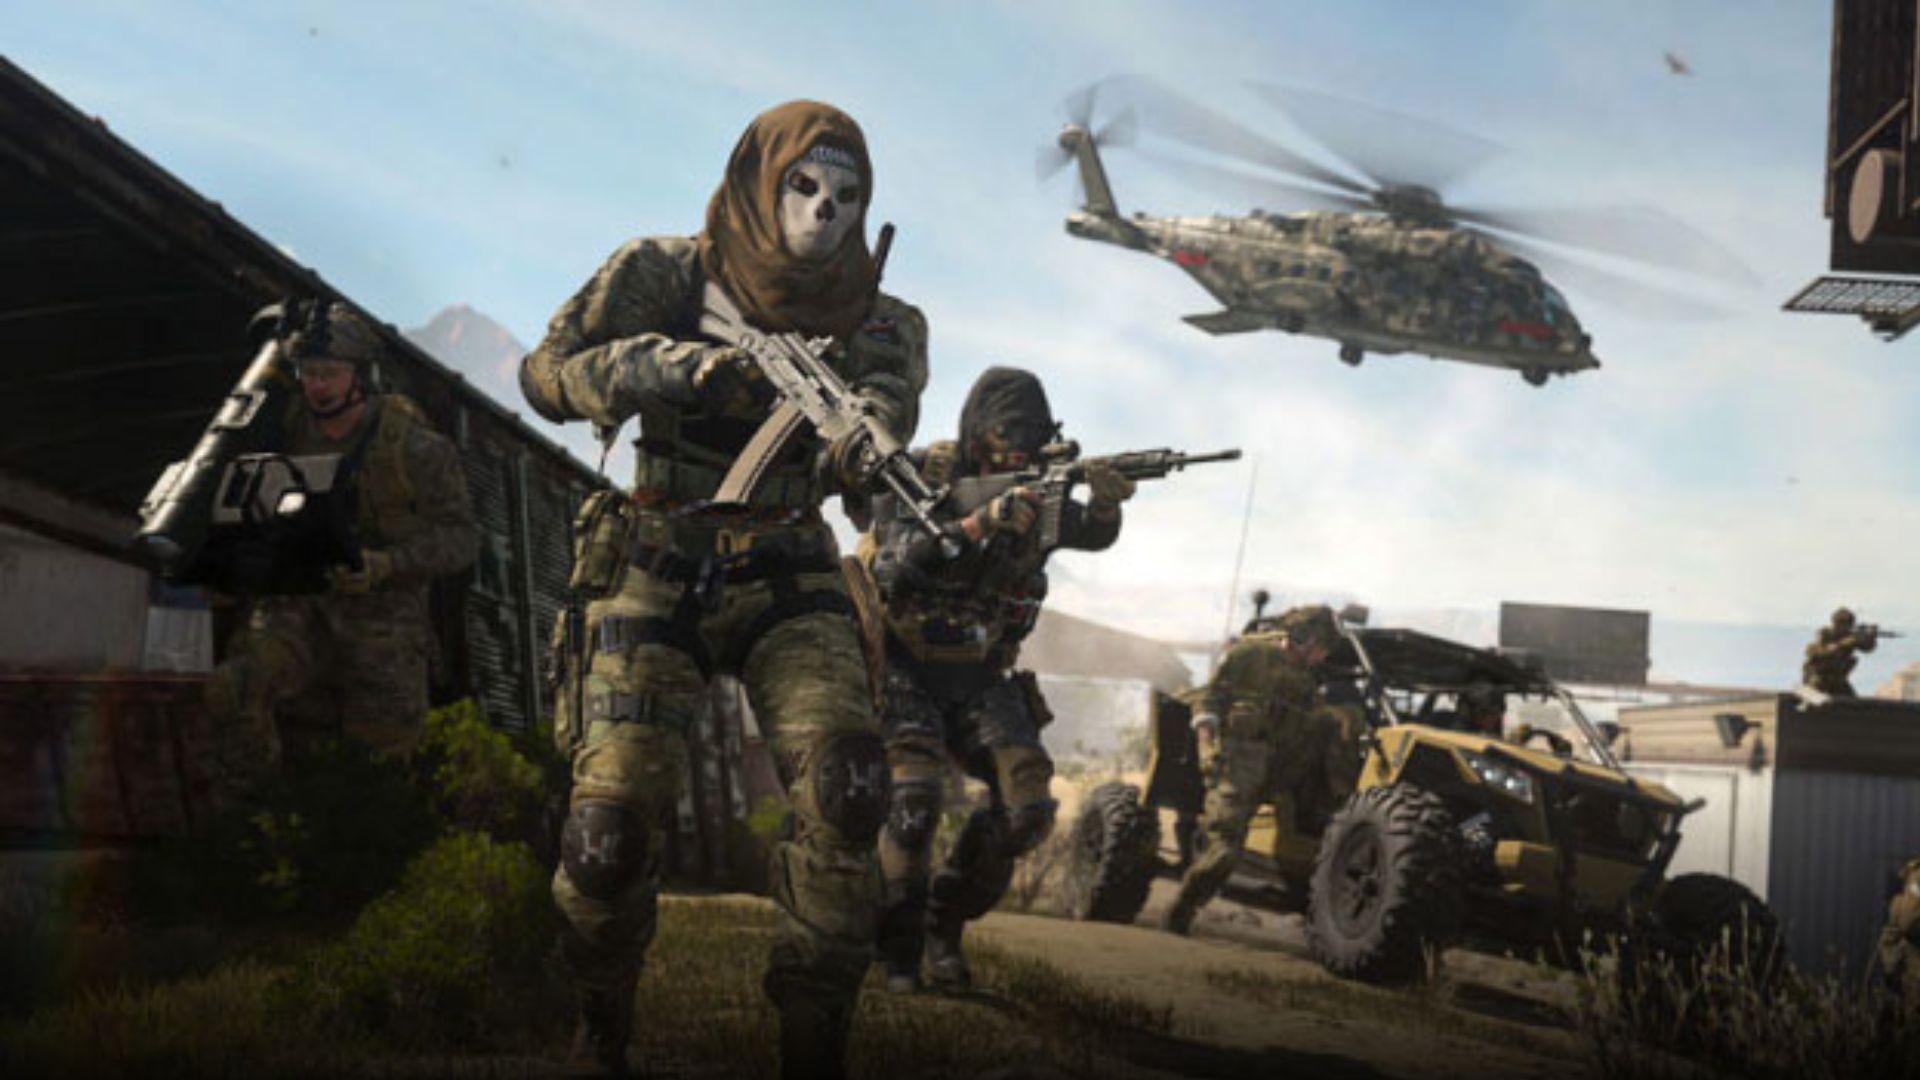 Warzone Mobile release date revealed; shares Modern Warfare 2